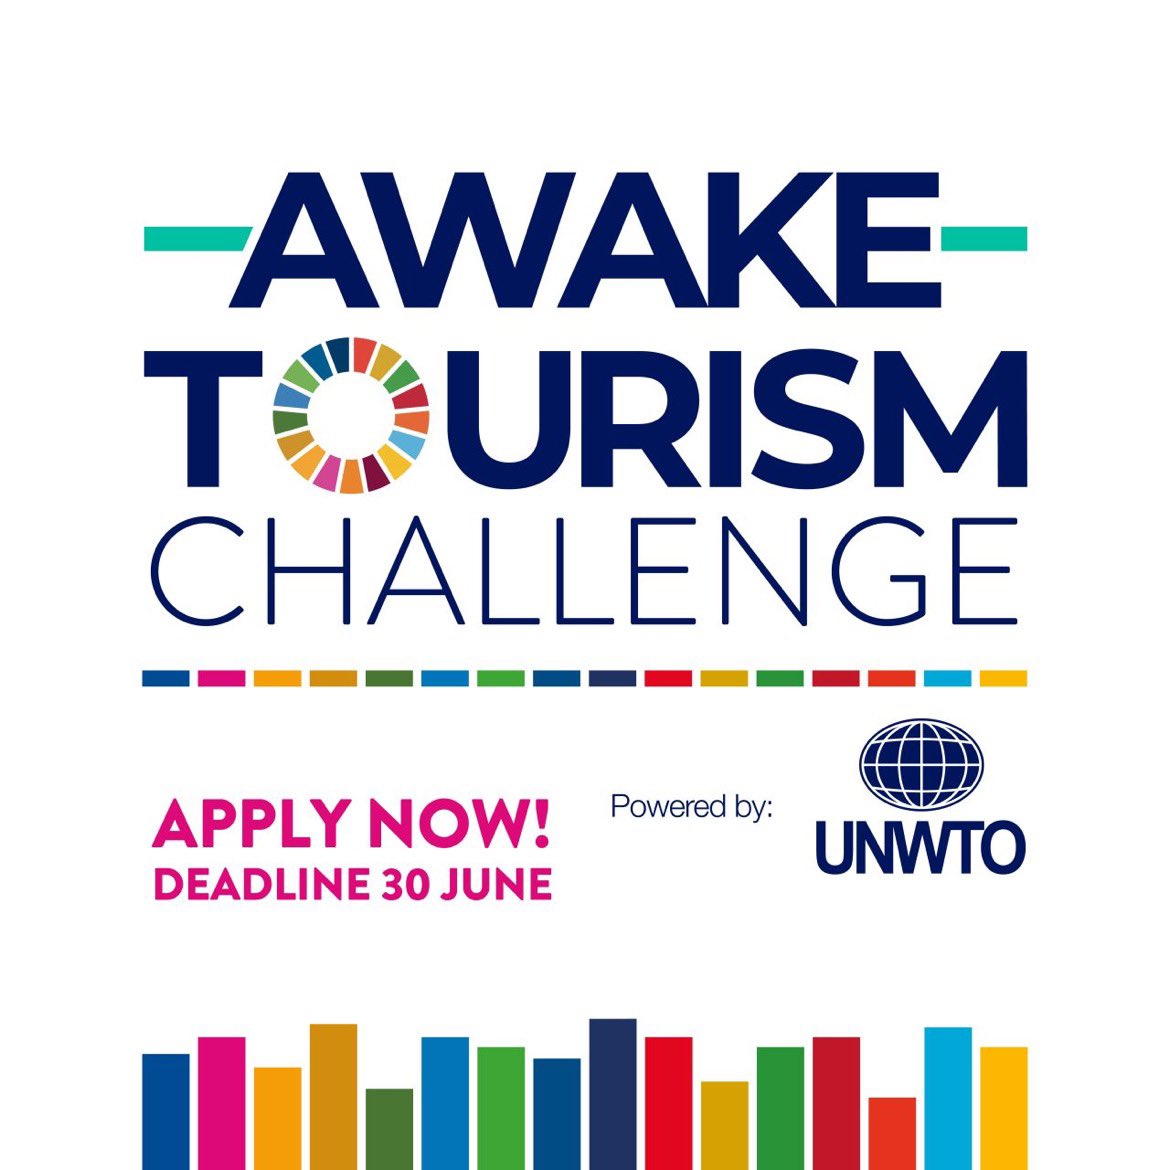 ⏰Wake up and join #UNWTO #AwakeTourismChallenge seeking to find the most innovative startups that are working to advance the #UnitedNations #SustainableDevelopmentGoals.

🇦🇱#Albania #Startups apply before 30 June: lnkd.in/eRHGDzqi